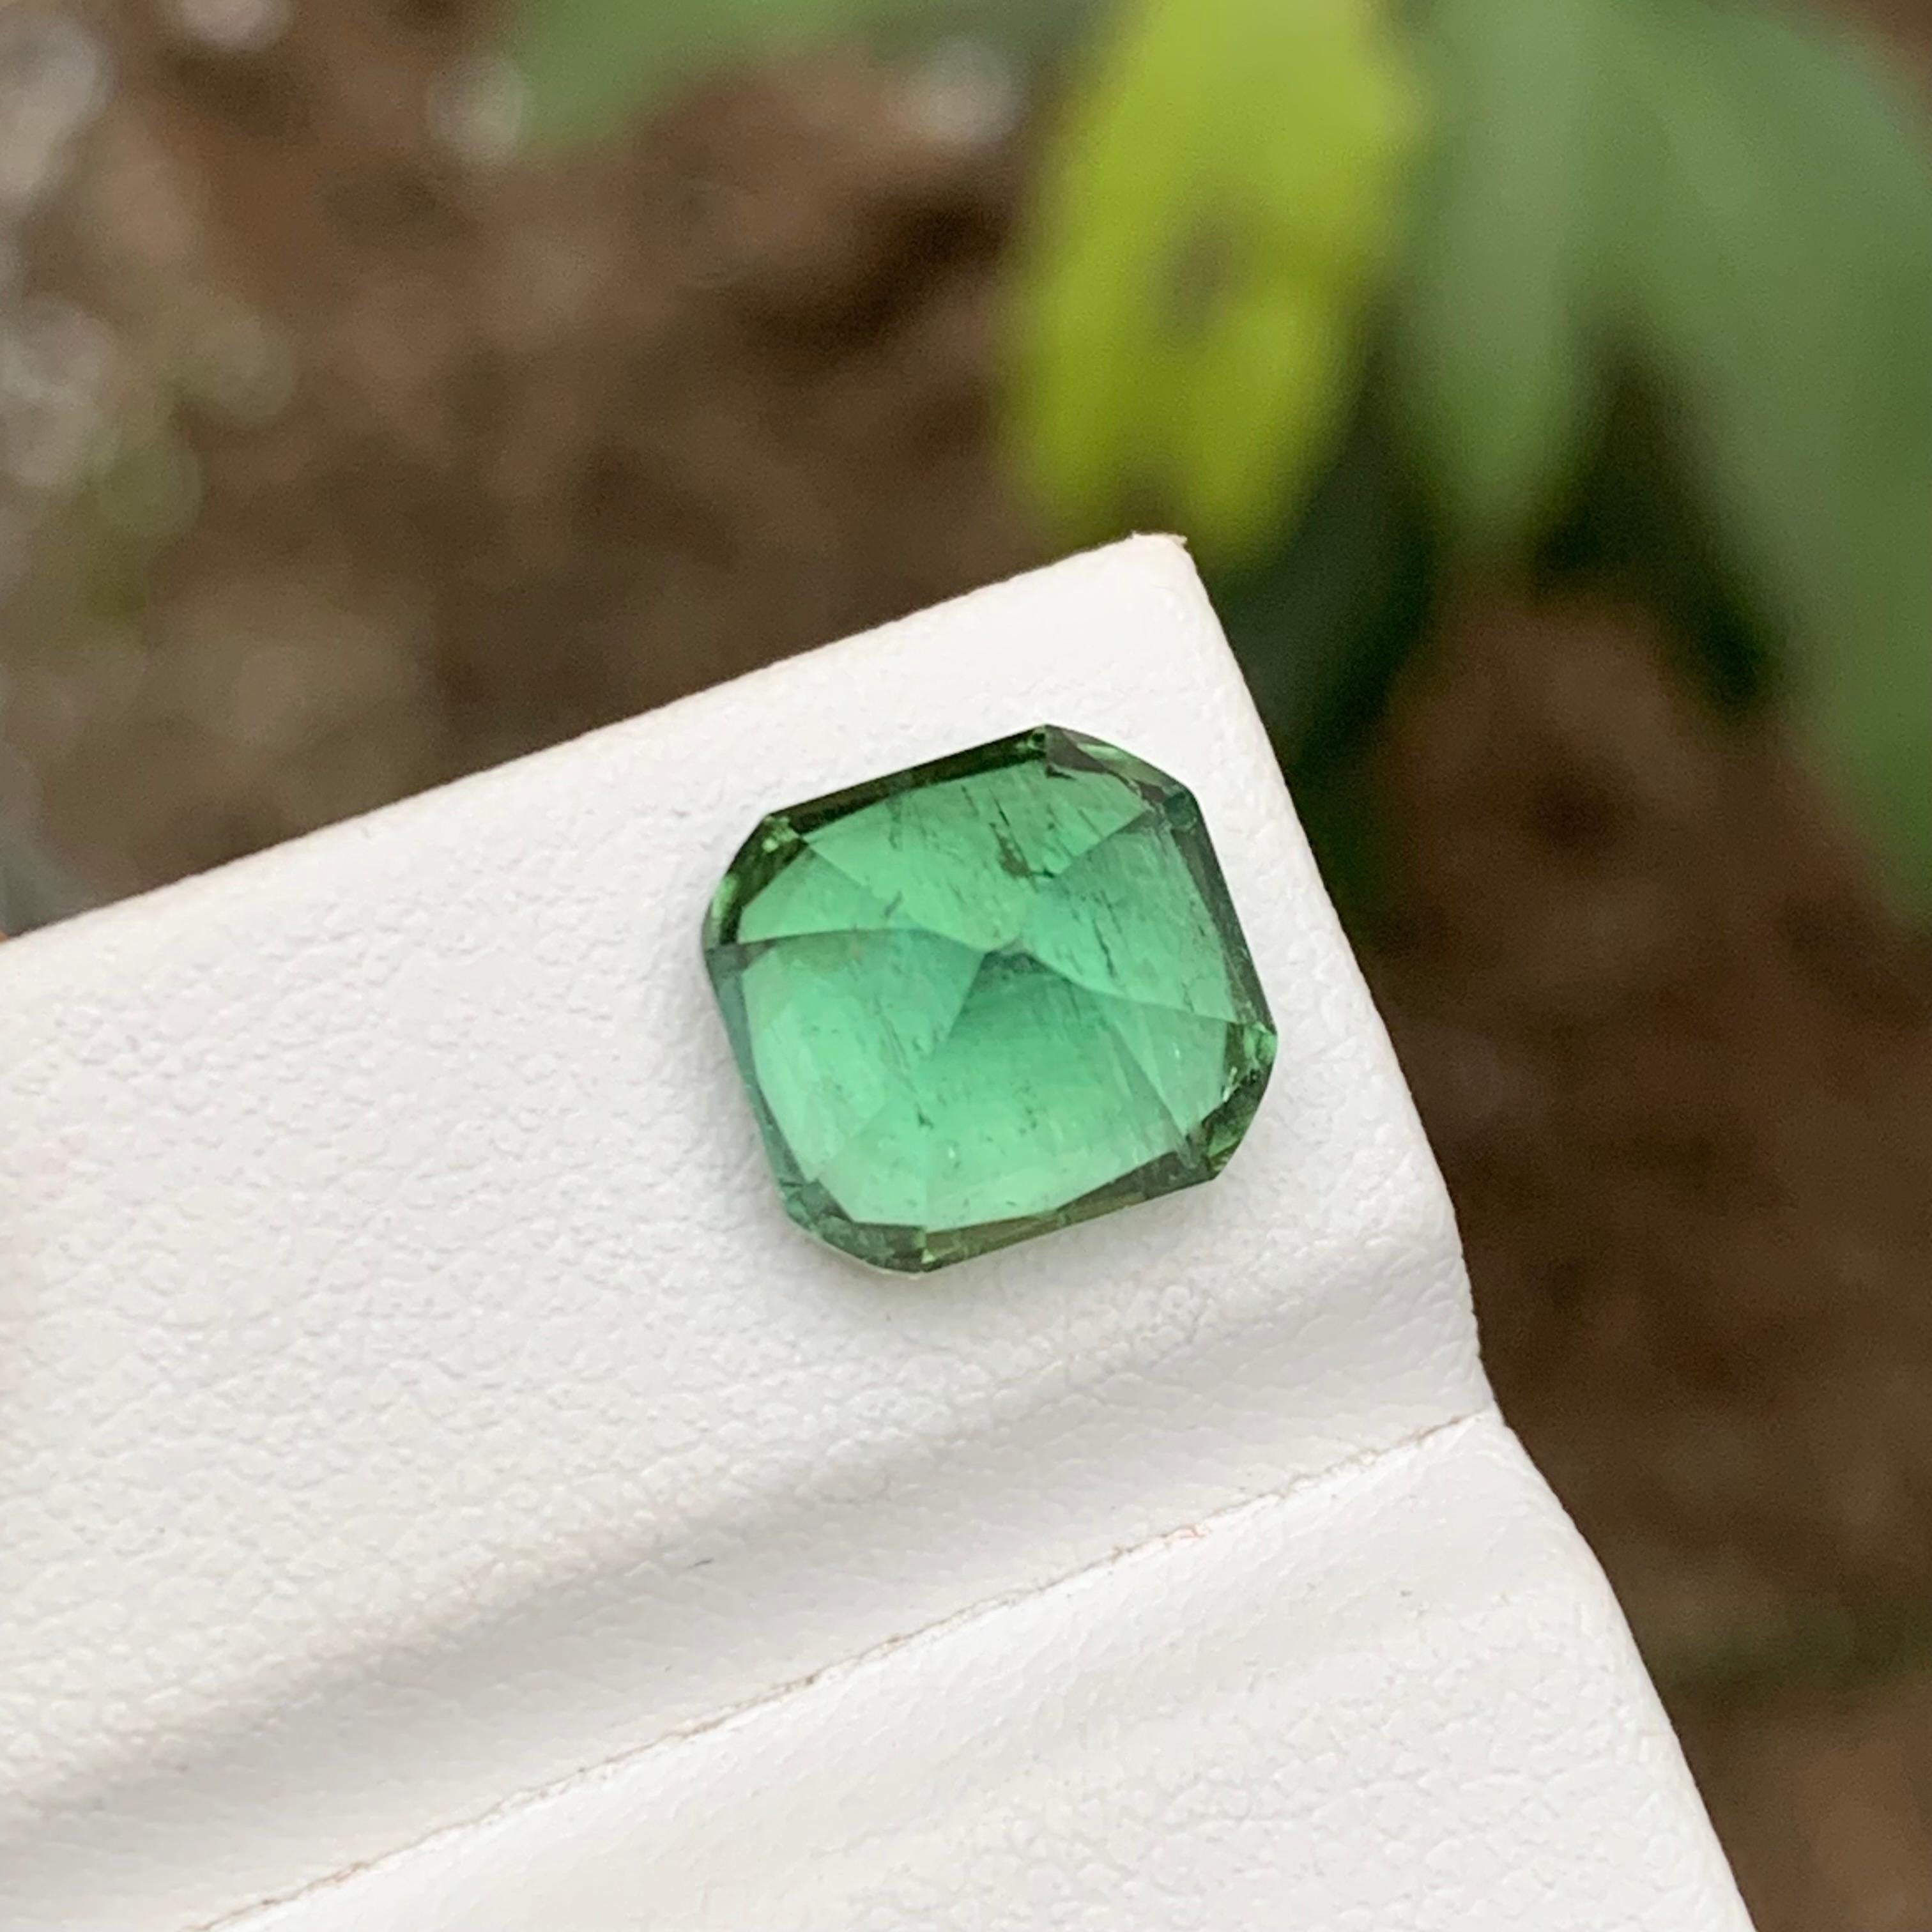 Rare Lagoon Mint Green Tourmaline Loose Gemstone, 5.05 Ct Cushion Cut for Ring In New Condition For Sale In Peshawar, PK